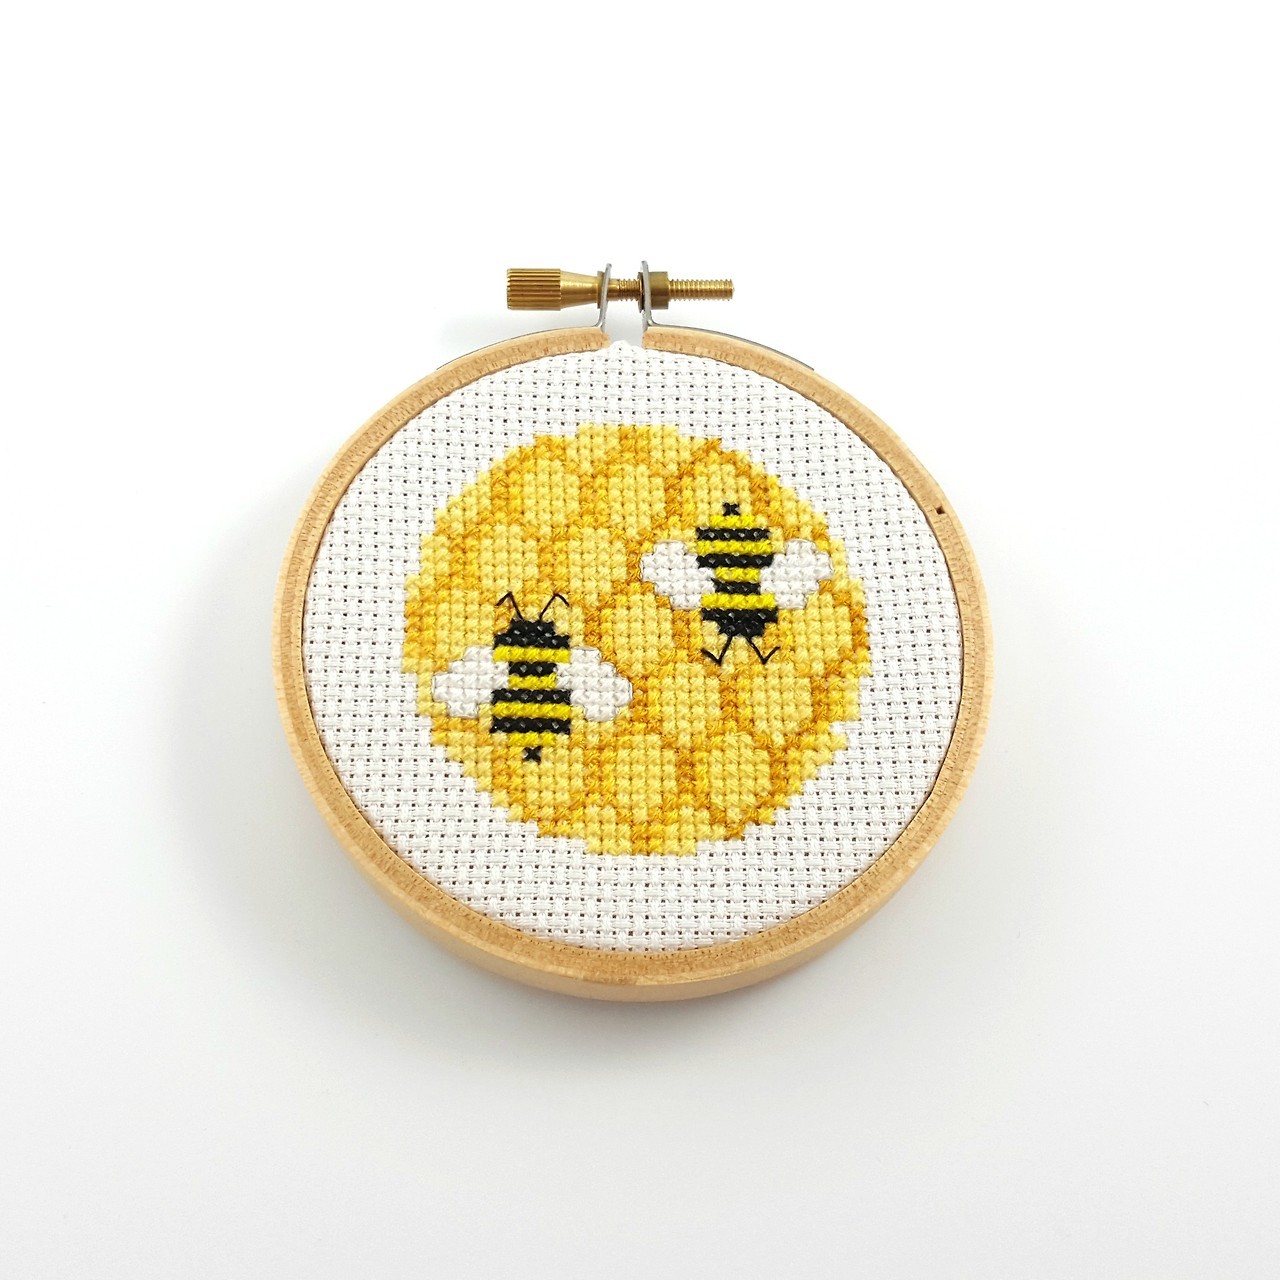 <p><a href="http://ringcat.tumblr.com/post/169549448841/love-the-geometric-feel-of-this-piece-bees-on-a" class="tumblr_blog">ringcat</a>:</p>

<blockquote><p>Love the geometric feel of this piece. Bees on a honeycomb</p><p>You can find the pattern here: <a href="https://www.etsy.com/listing/543541292/honeycomb-and-bee-cross-stitch-pattern?ref=shop_home_active_4">https://www.etsy.com/listing/543541292/honeycomb-and-bee-cross-stitch-pattern?ref=shop_home_active_4</a></p></blockquote>